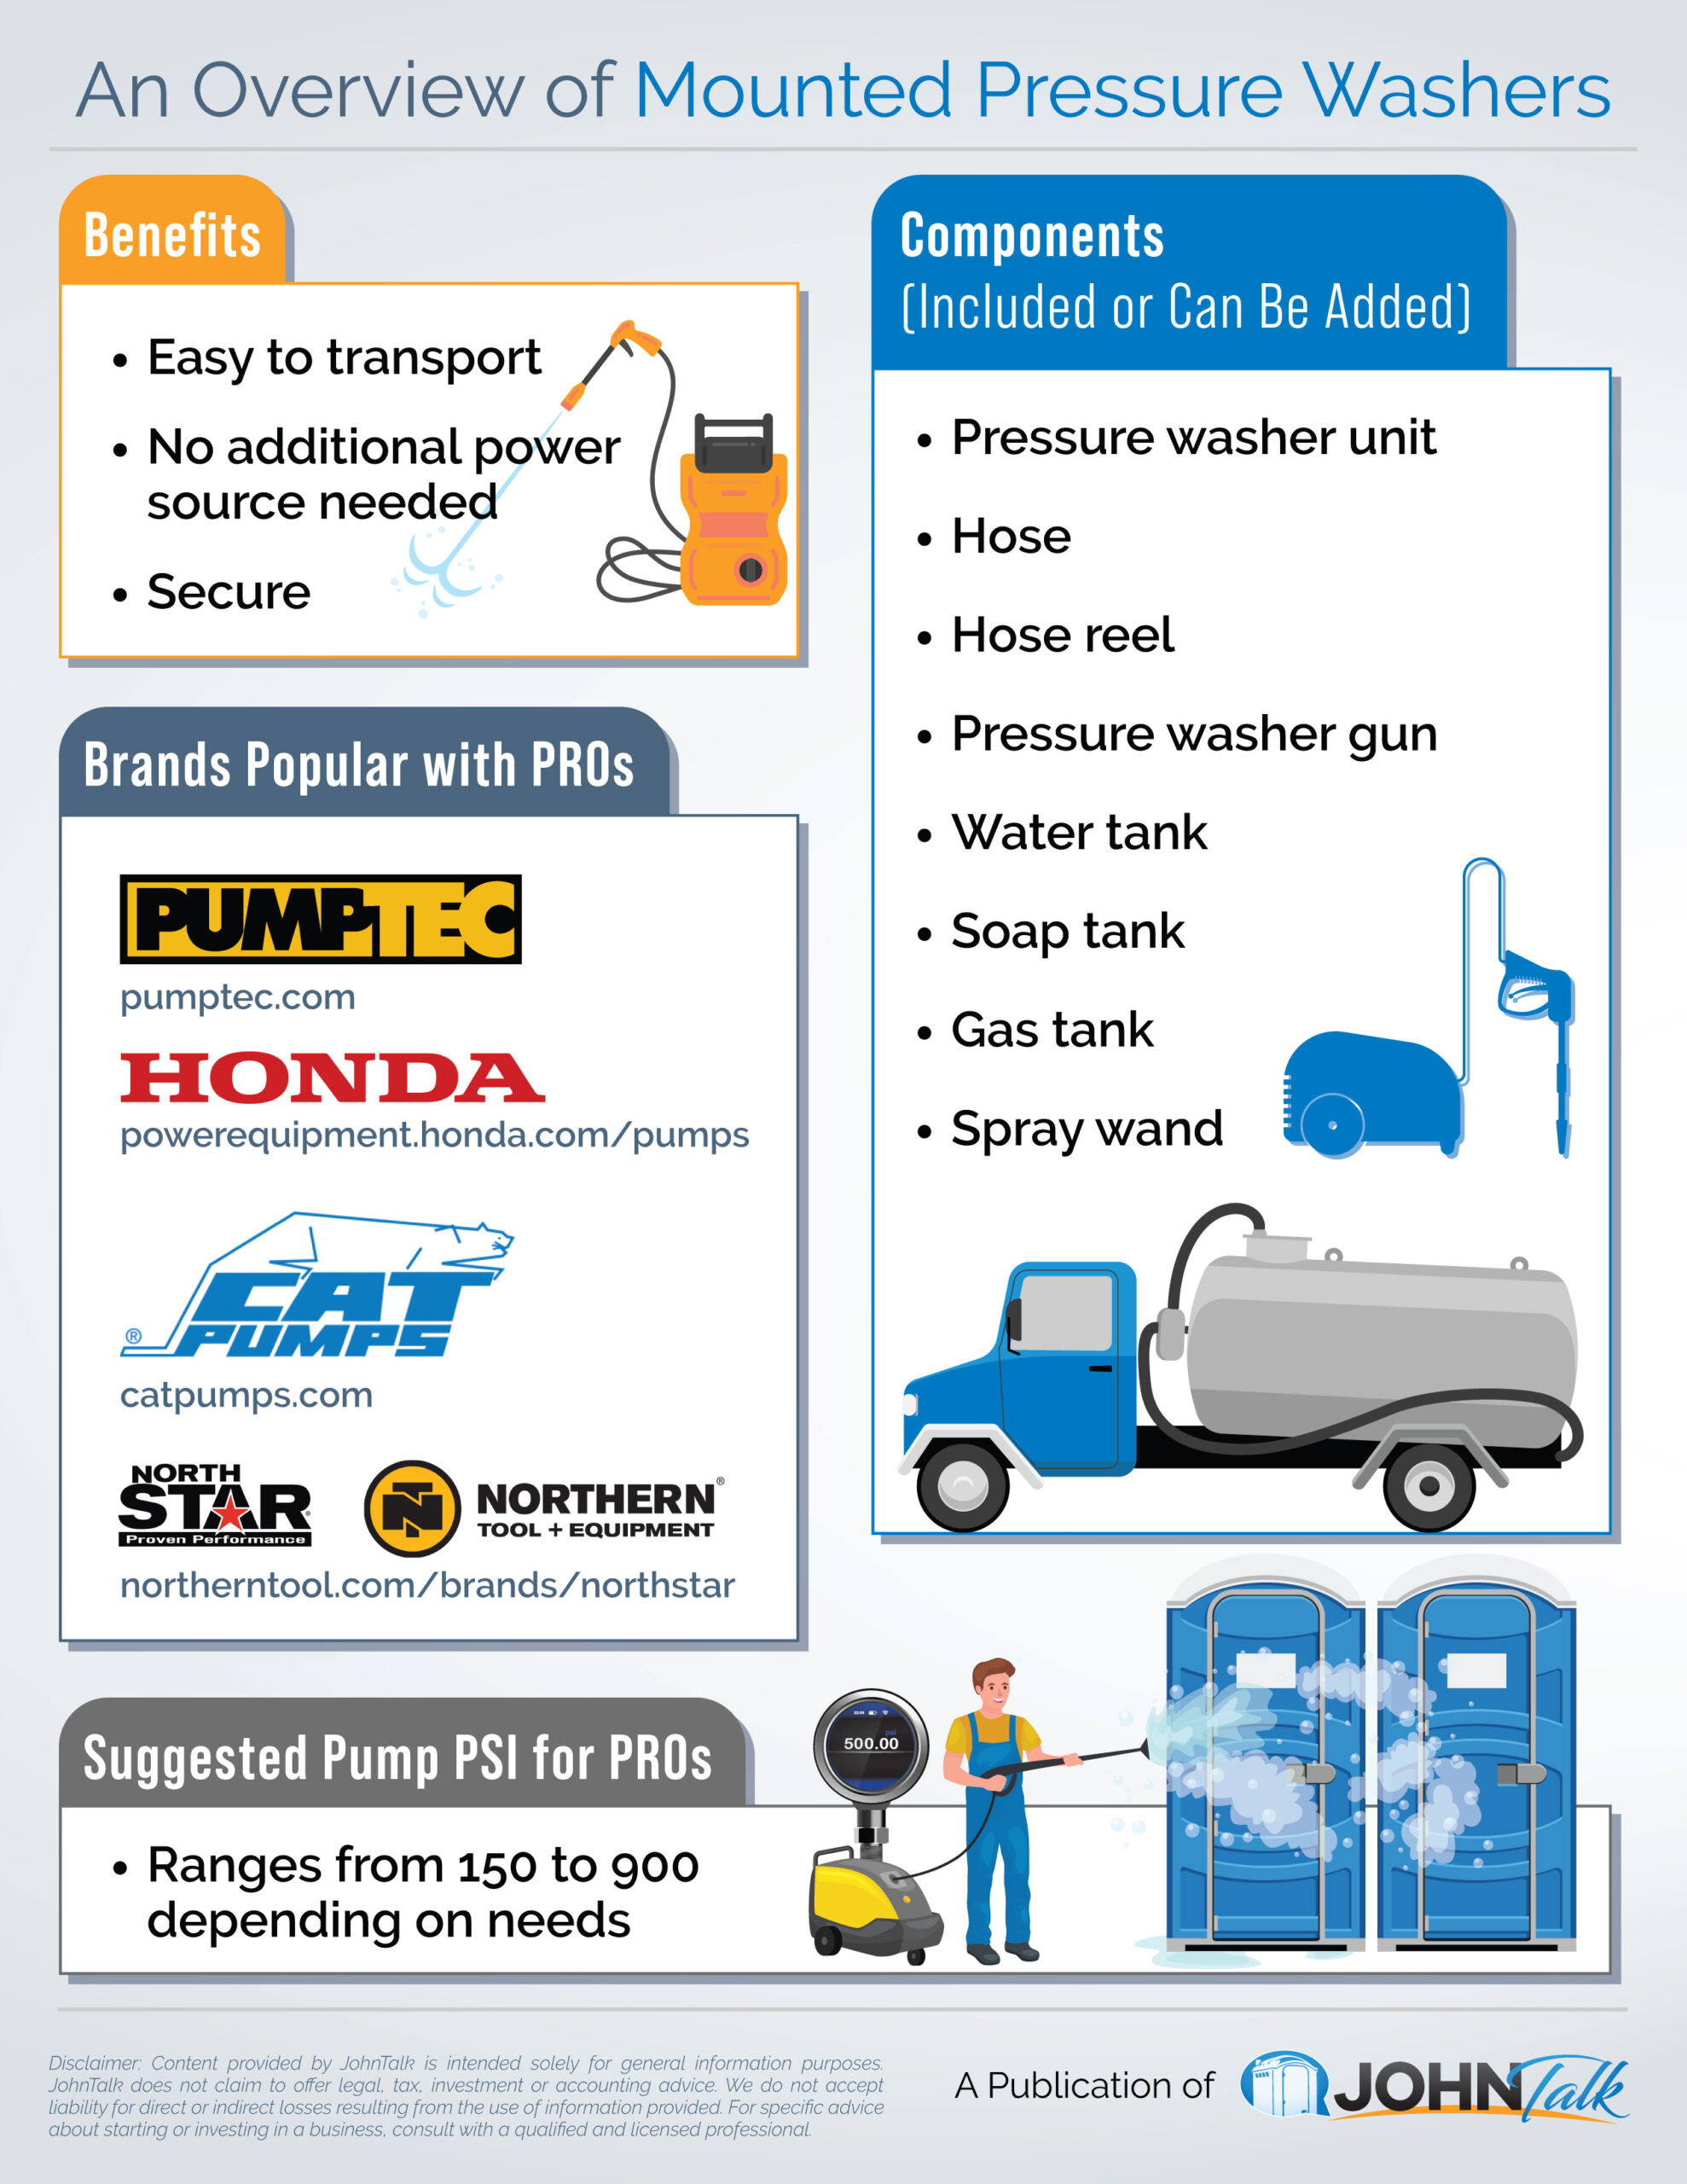 An Overview of Mounted Pressure Washers